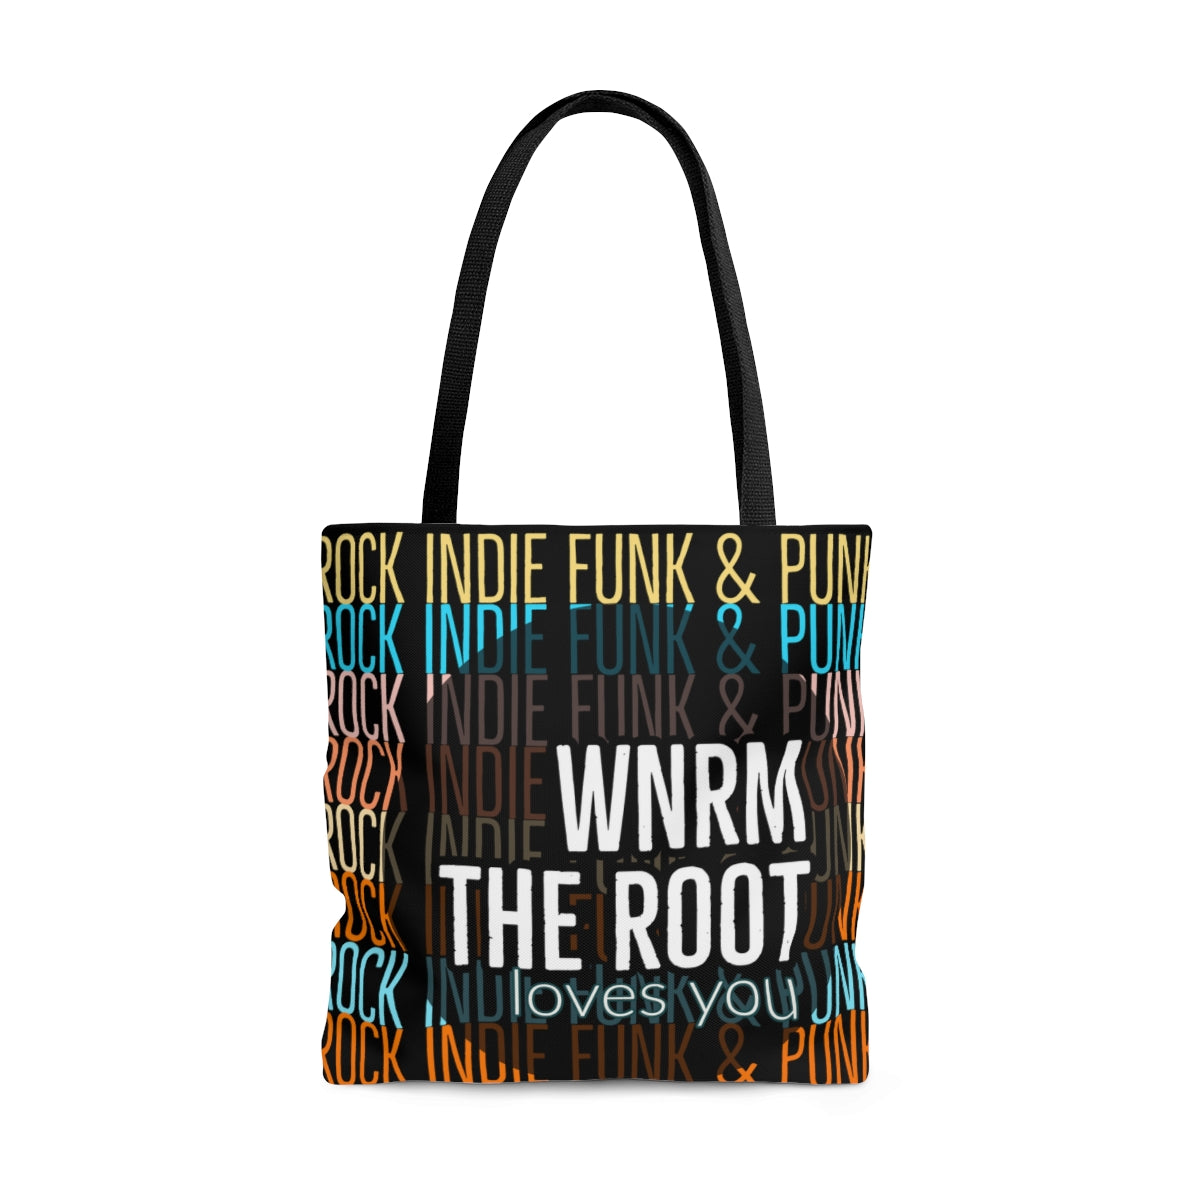 Black WNRM The Root Loves You canvass tote bag, with rock, indie, funk &  punk repeated in rainbow colors